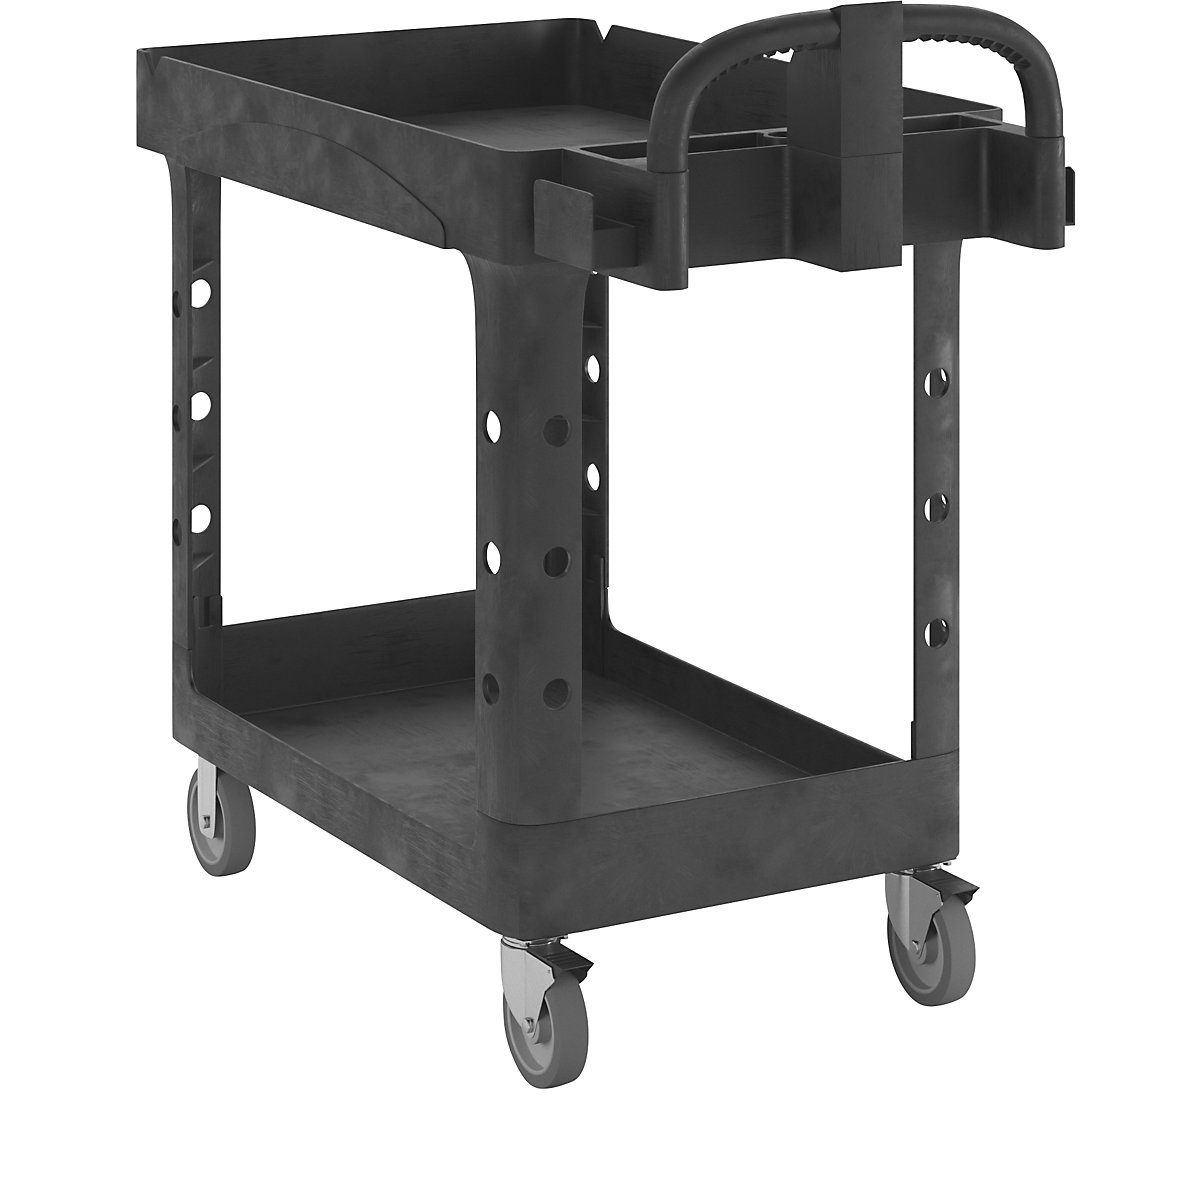 General purpose table trolley made of plastic - Rubbermaid